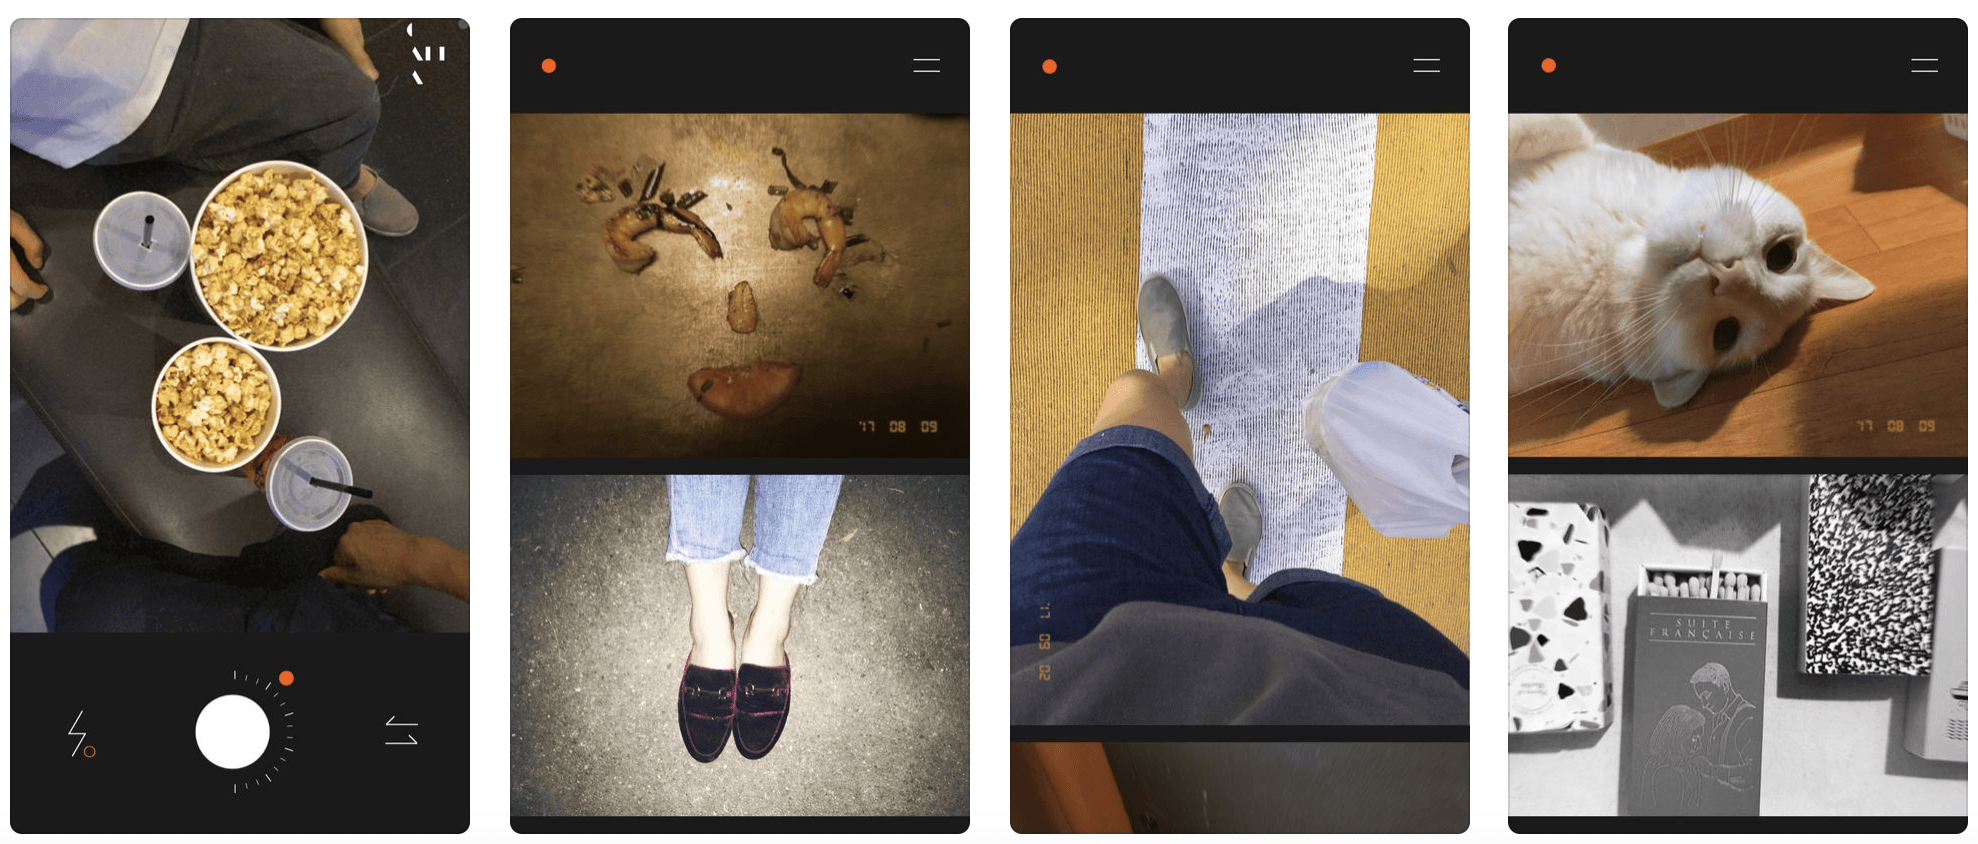 Just Some of the Best Analog Film Camera Apps To Try